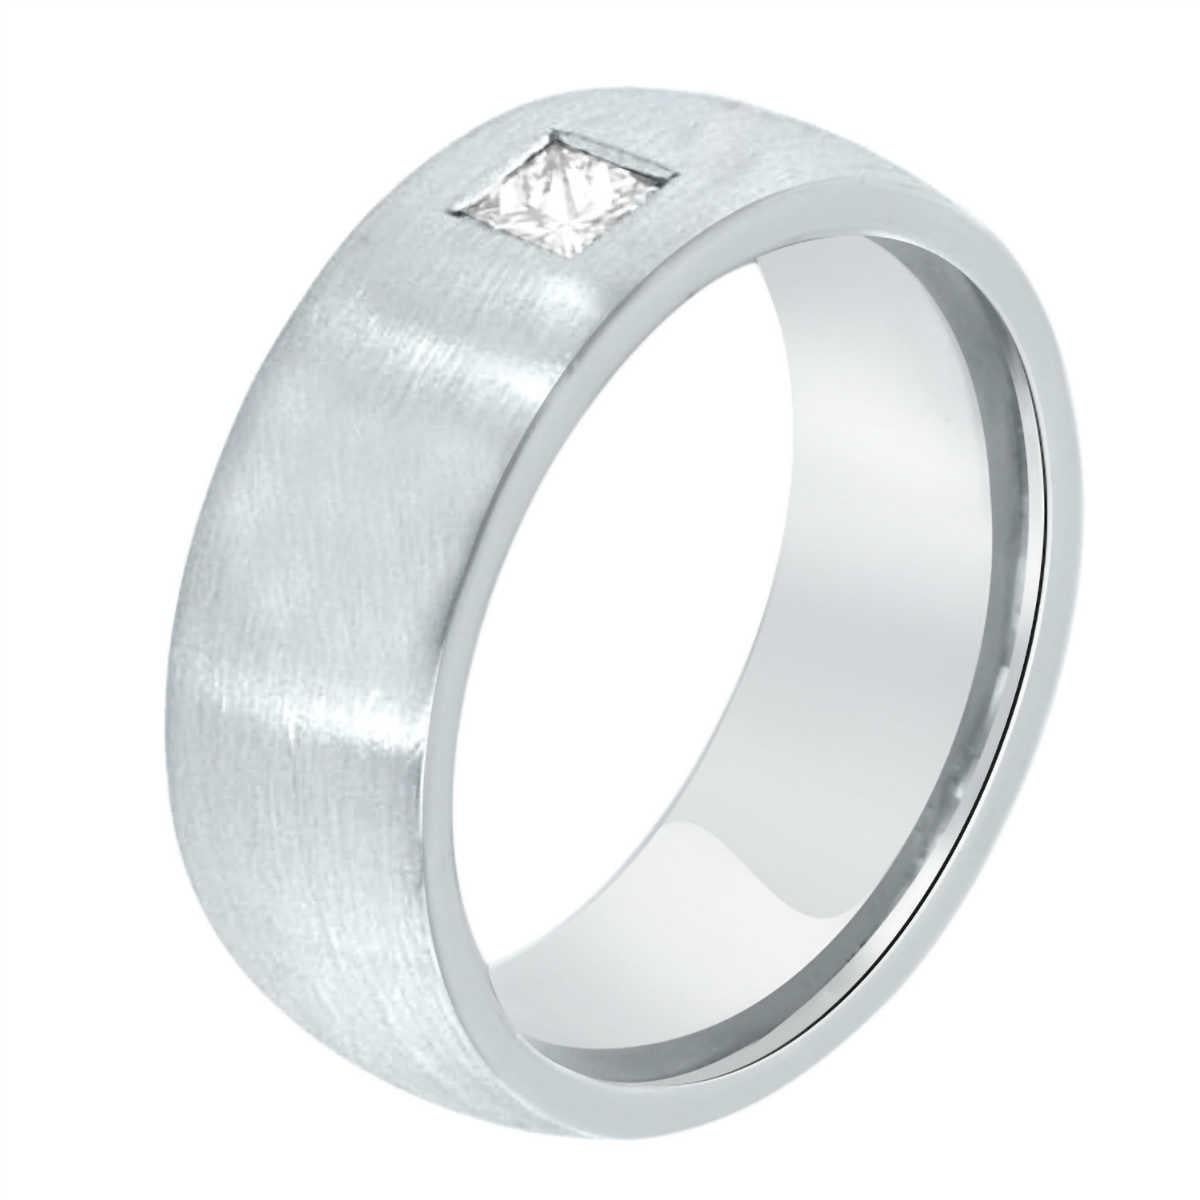 This Platinum handcrafted Men's band showcases a single Princess cut diamond on an eight (8) MM wide band. The band is in a satin finish and comfort fit.

Diamond Weight : 0.30 Carats
Diamond Color: G 
Diamond Clarity: SI1
Finger size : 6.75